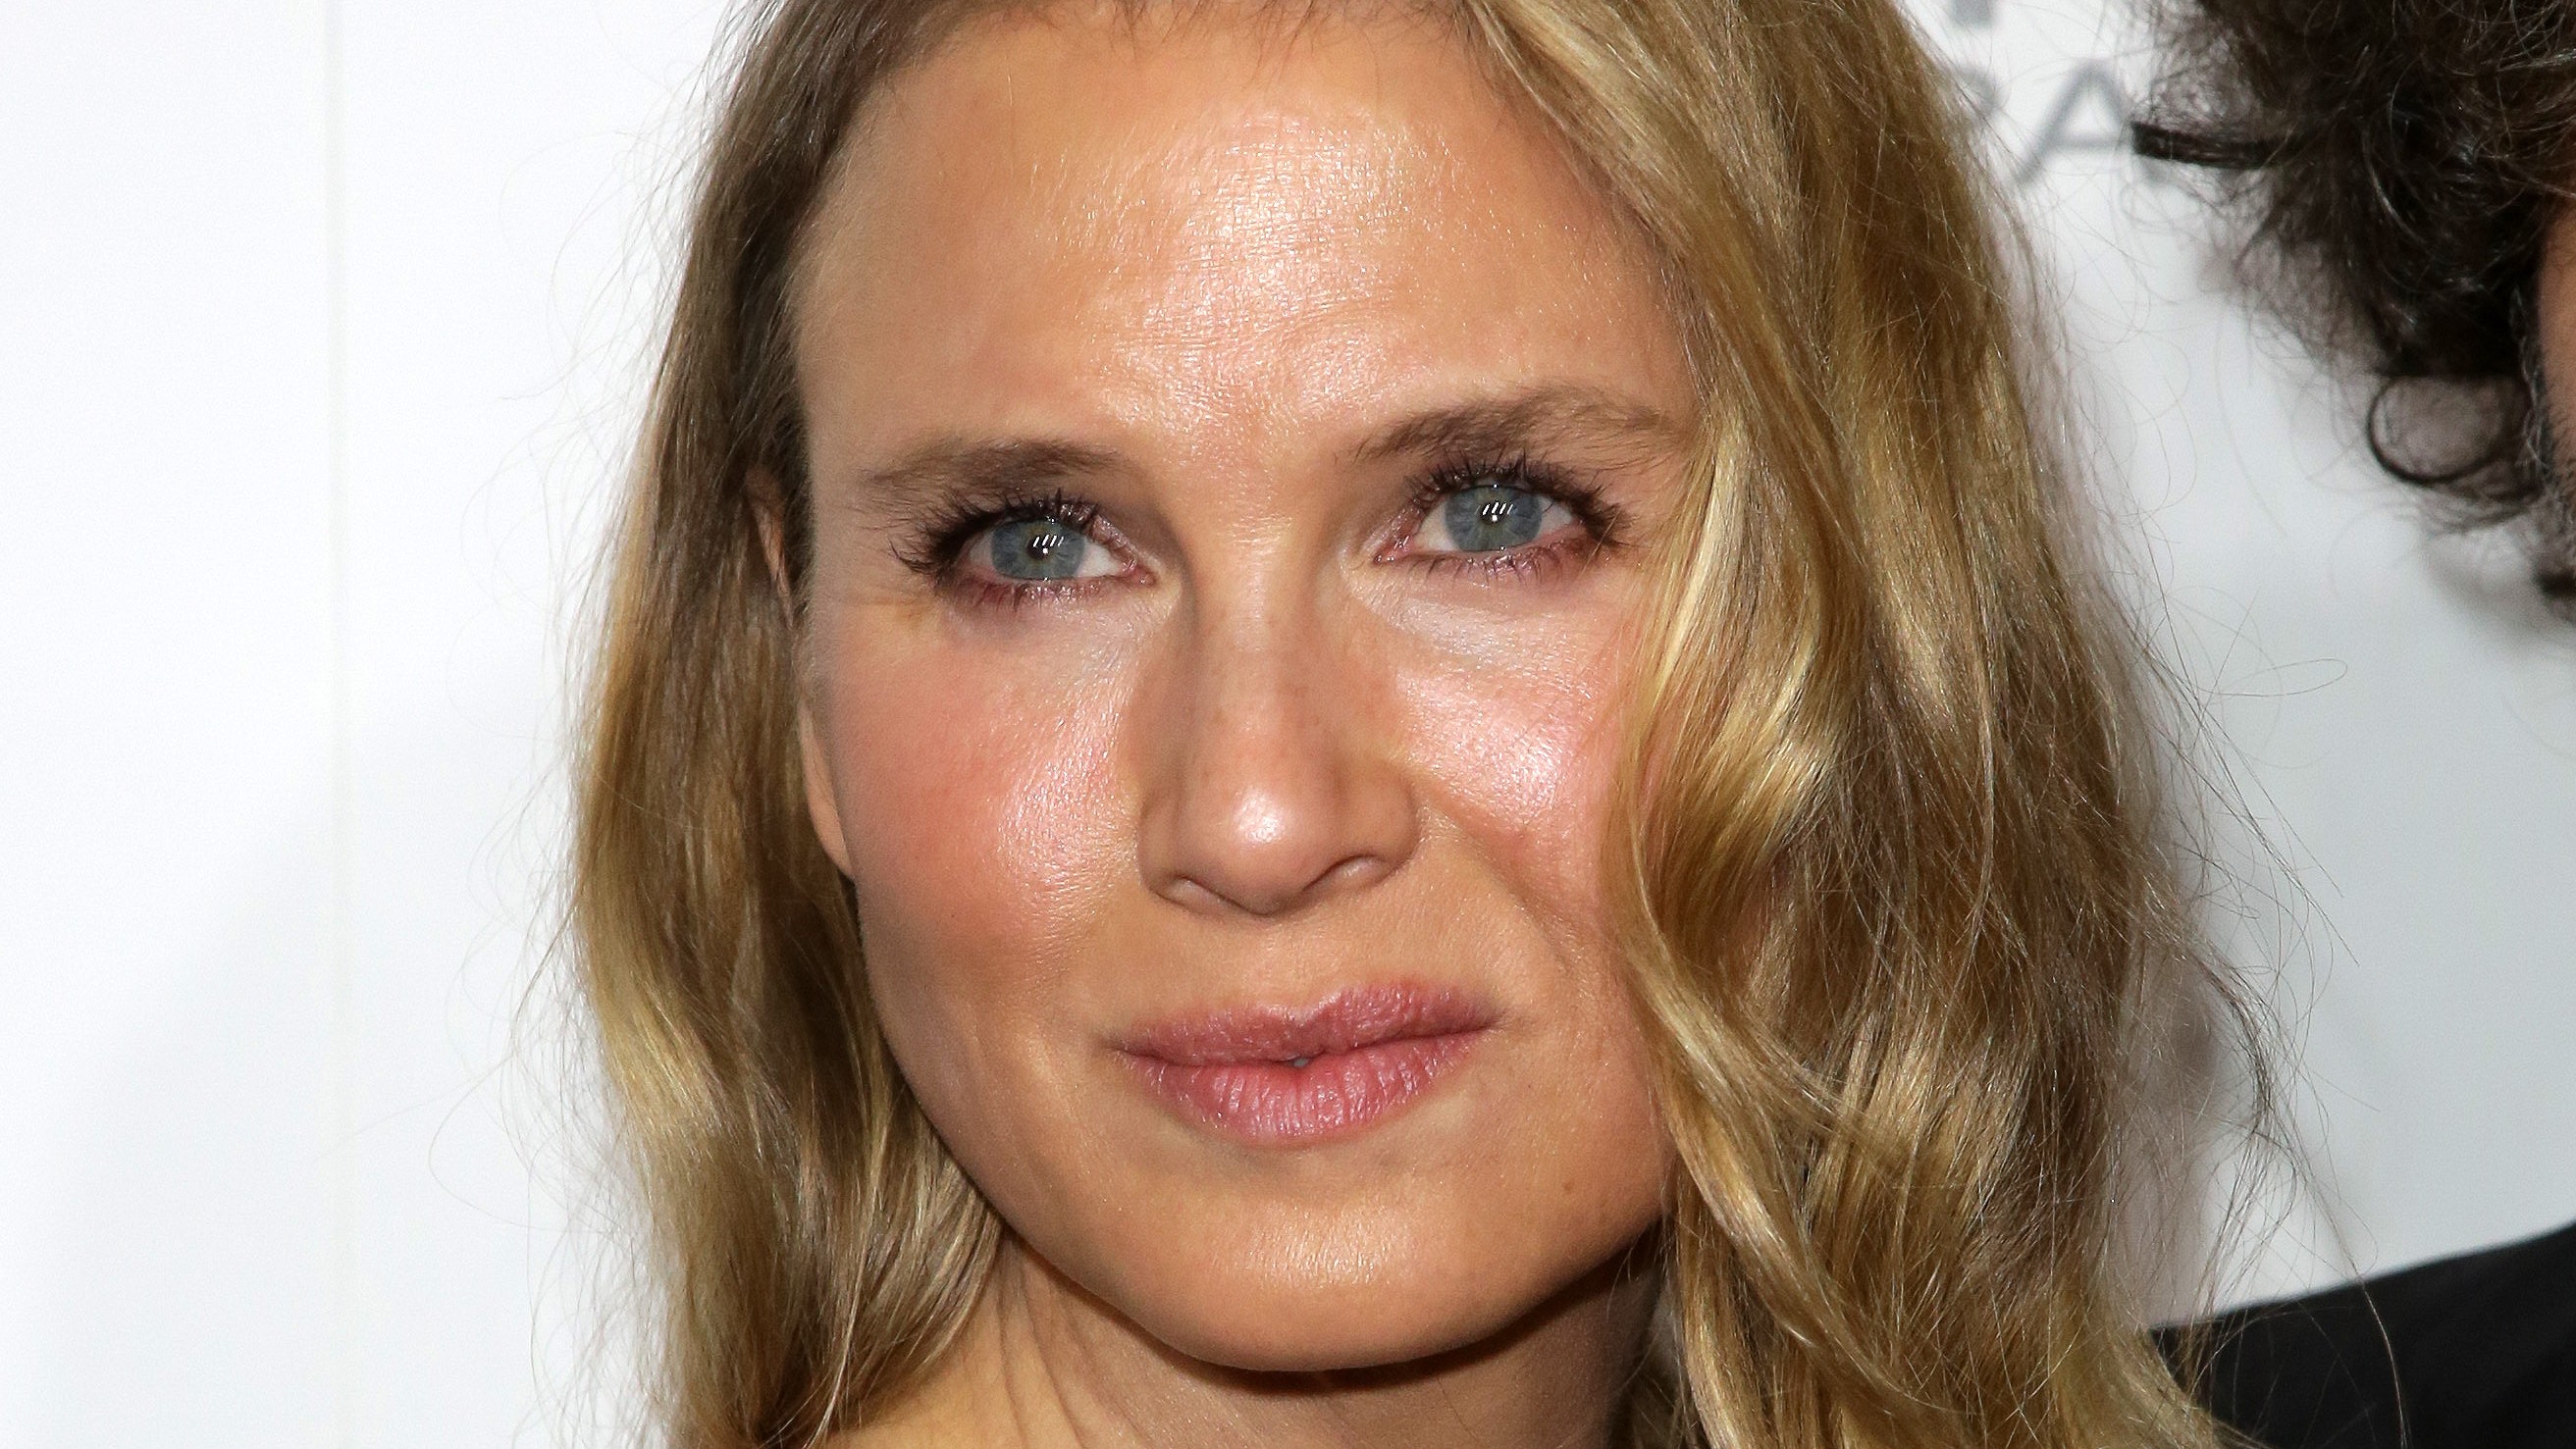 The Zellweger effect: is she trying to erase her Norwegian roots?